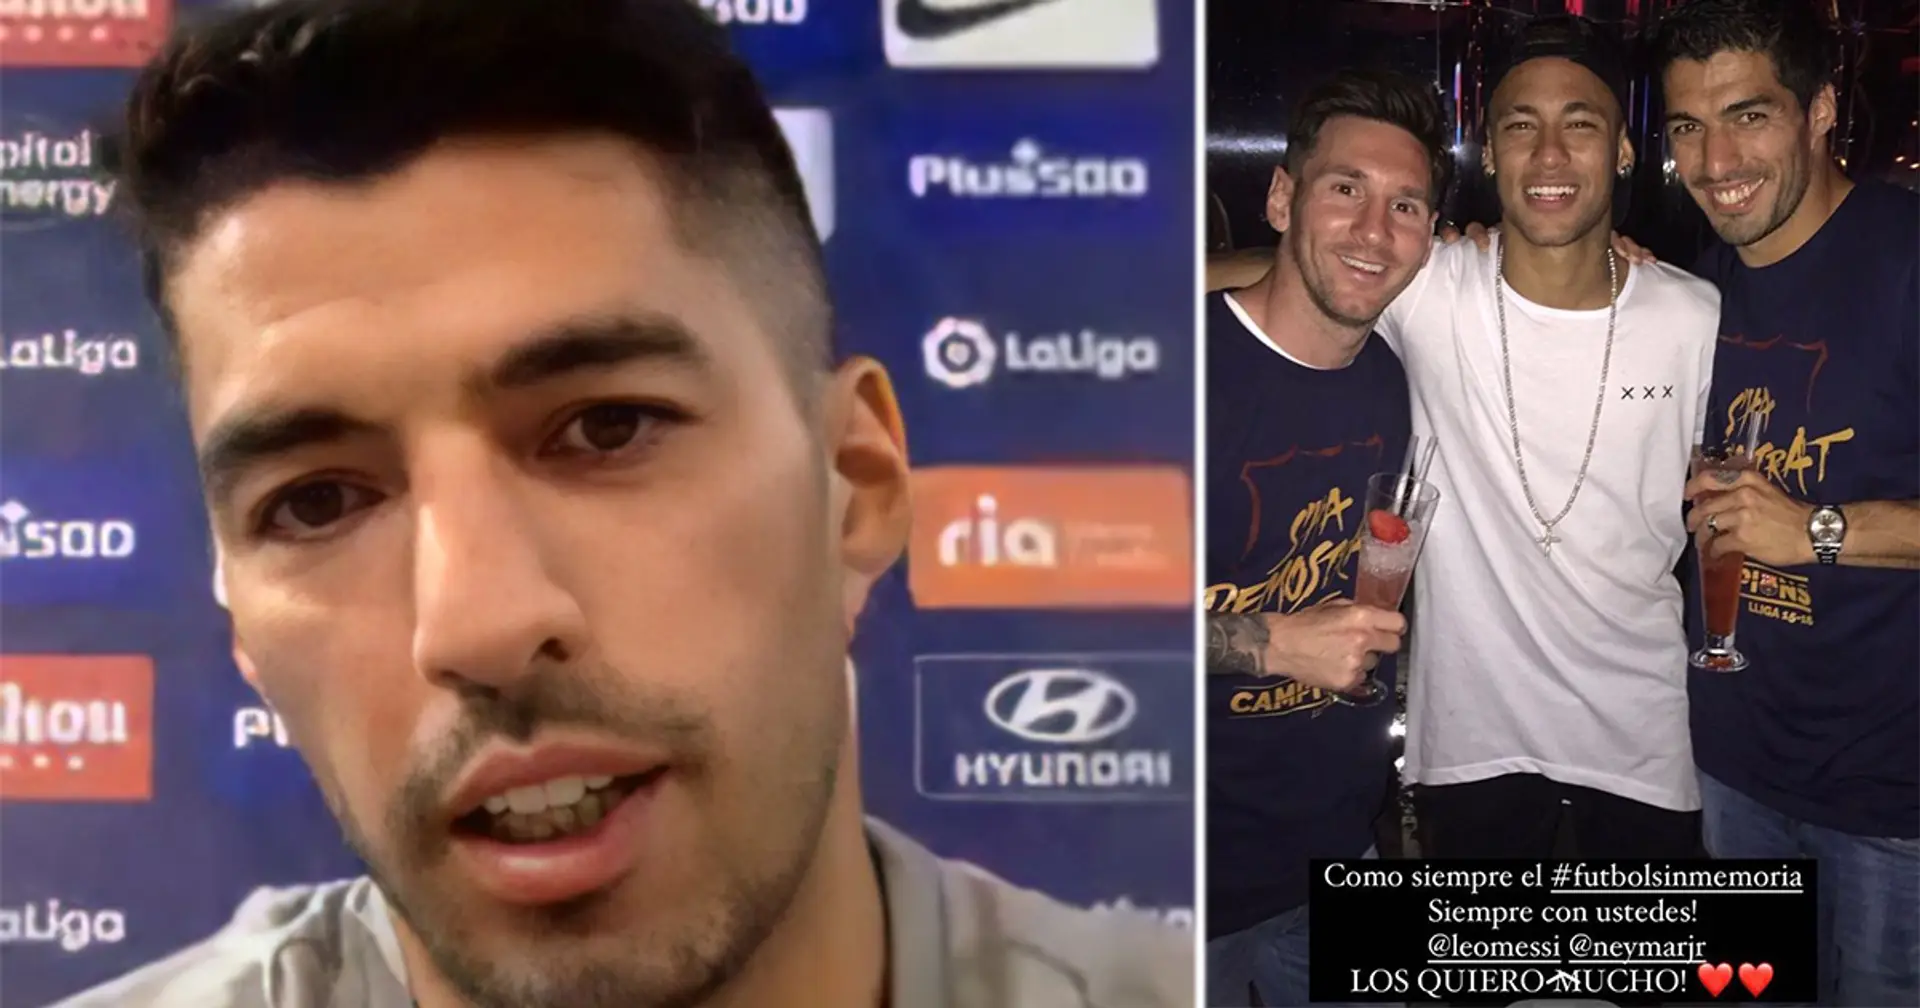 'As usual, football has no memory': Luis Suarez reacts to Messi-Neymar treatment by PSG fans